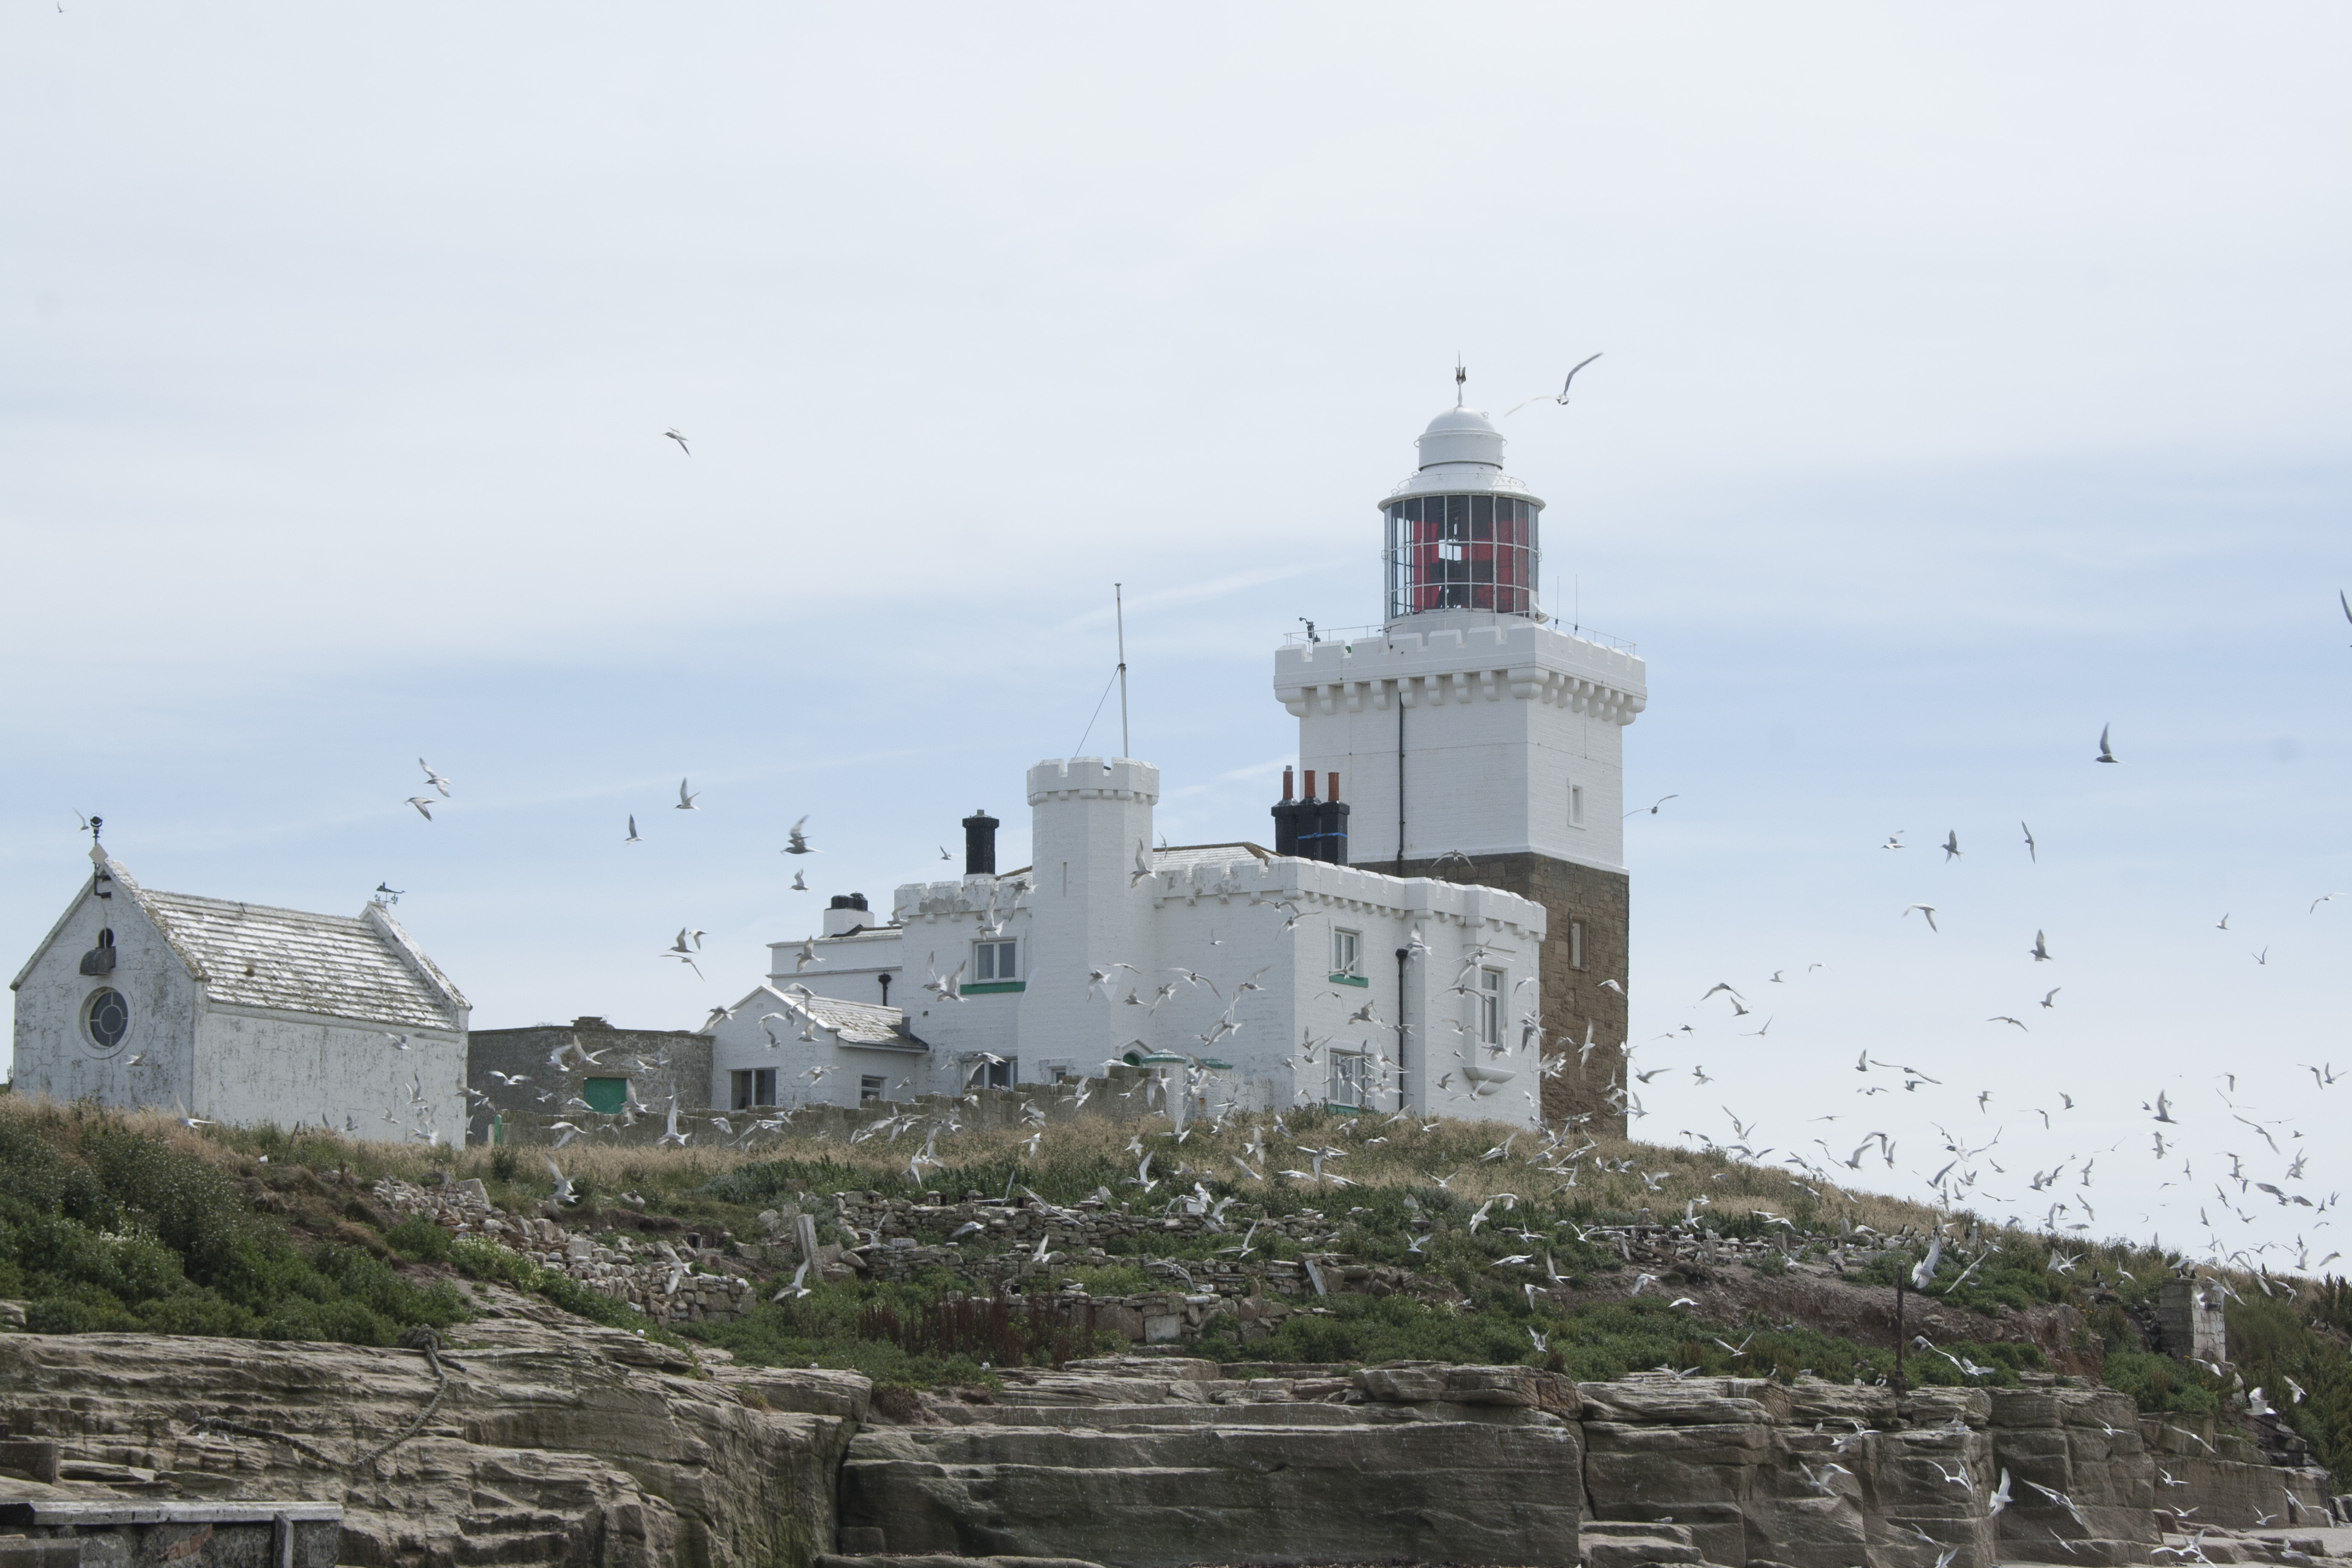 Coquet Island is a designated nature sanctuary, but it too is under threat from climate change